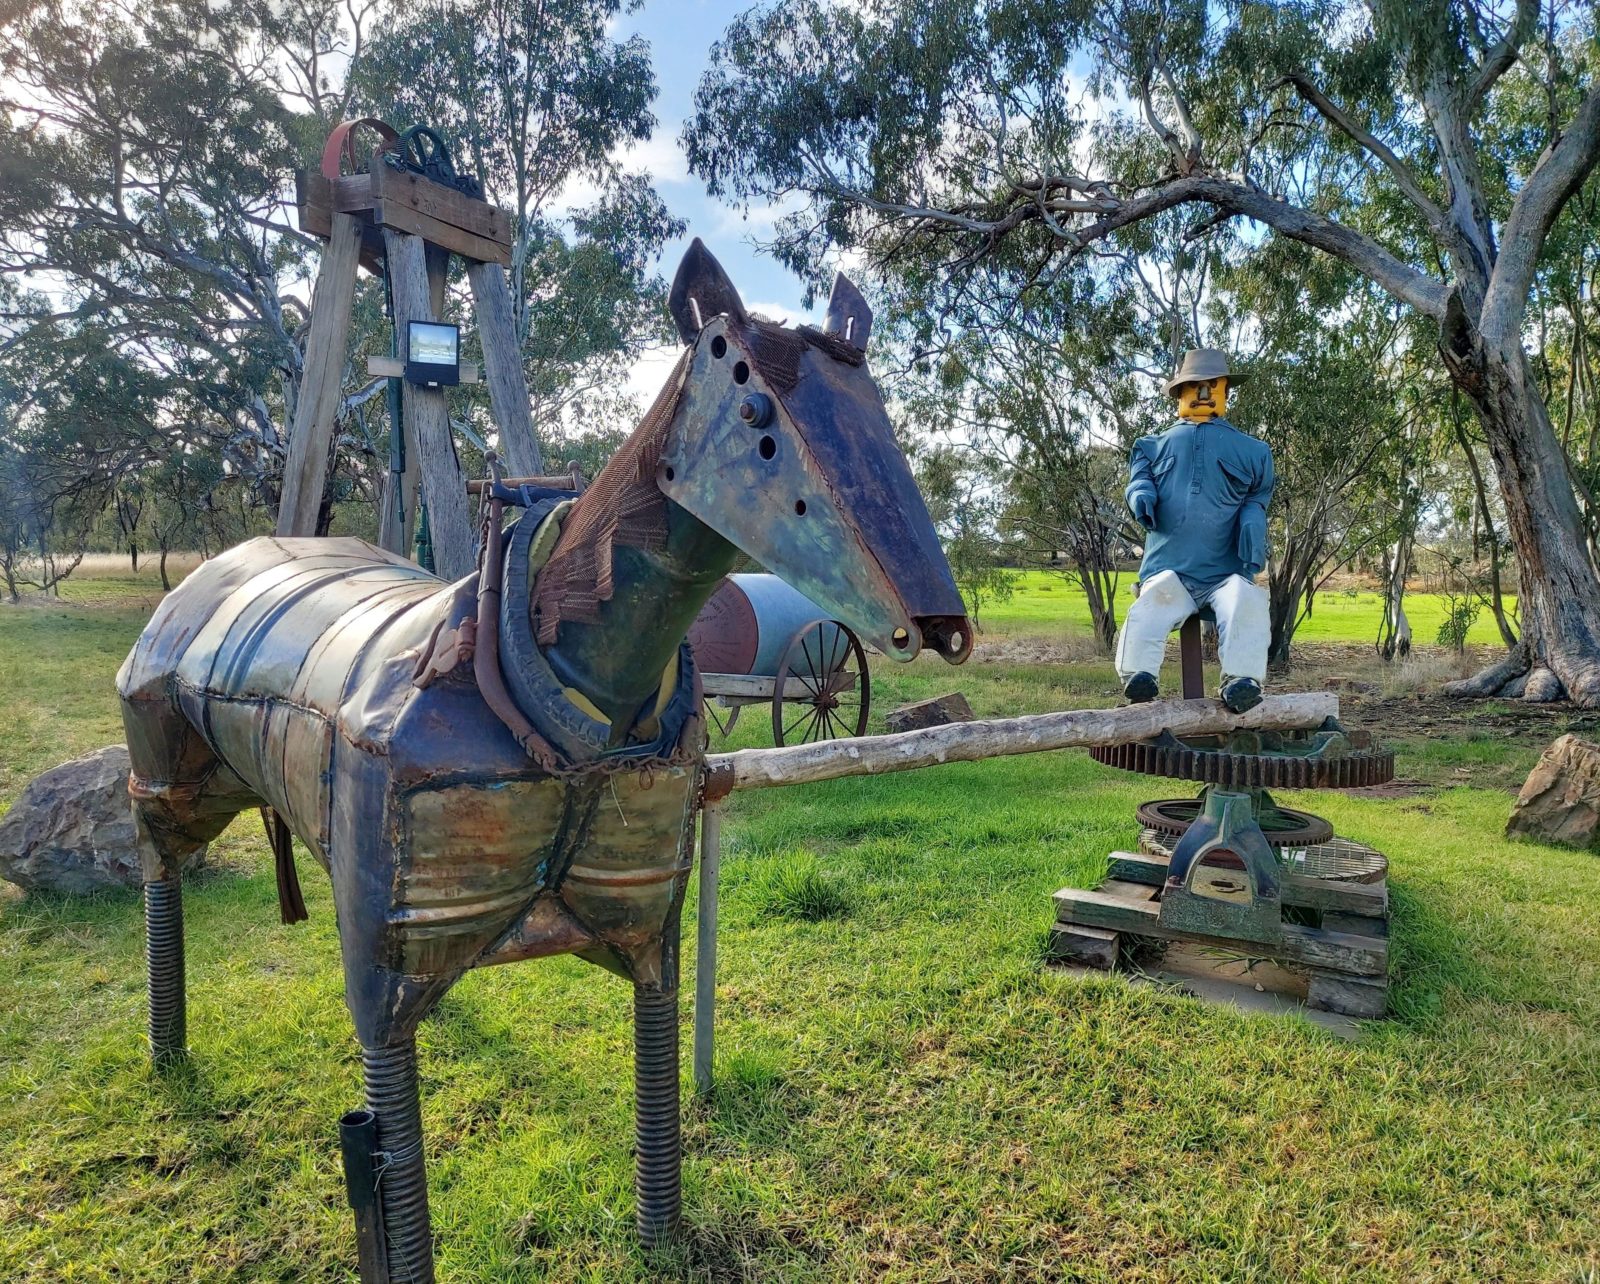 A metal horse sculpture and a man sitting at a water pump in a grassy park.